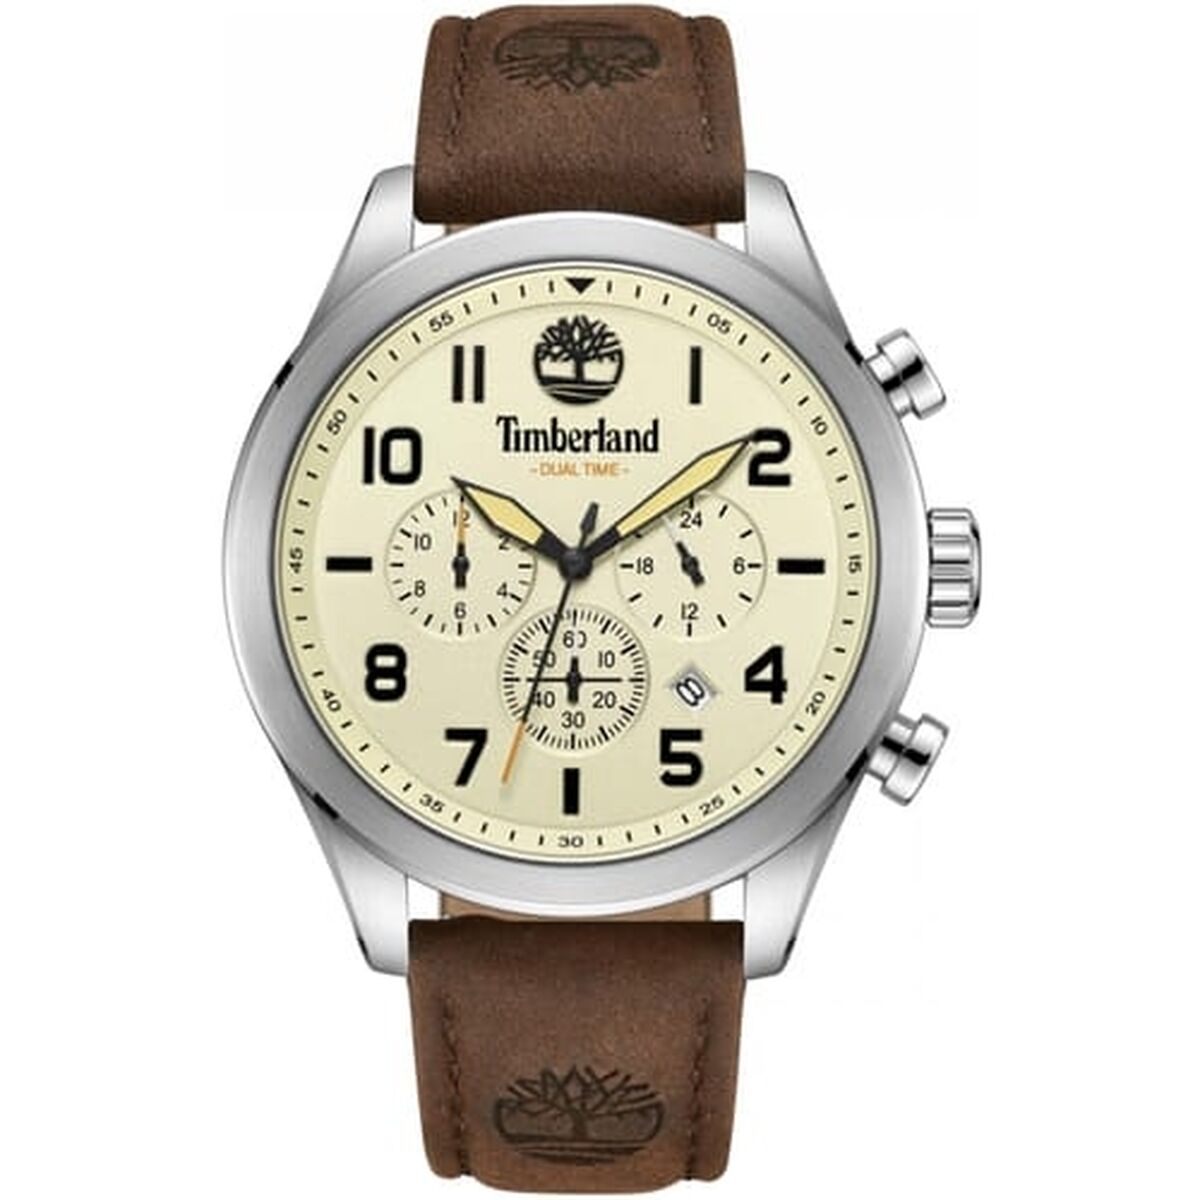 Montre Homme Timberland TDWGF0009703